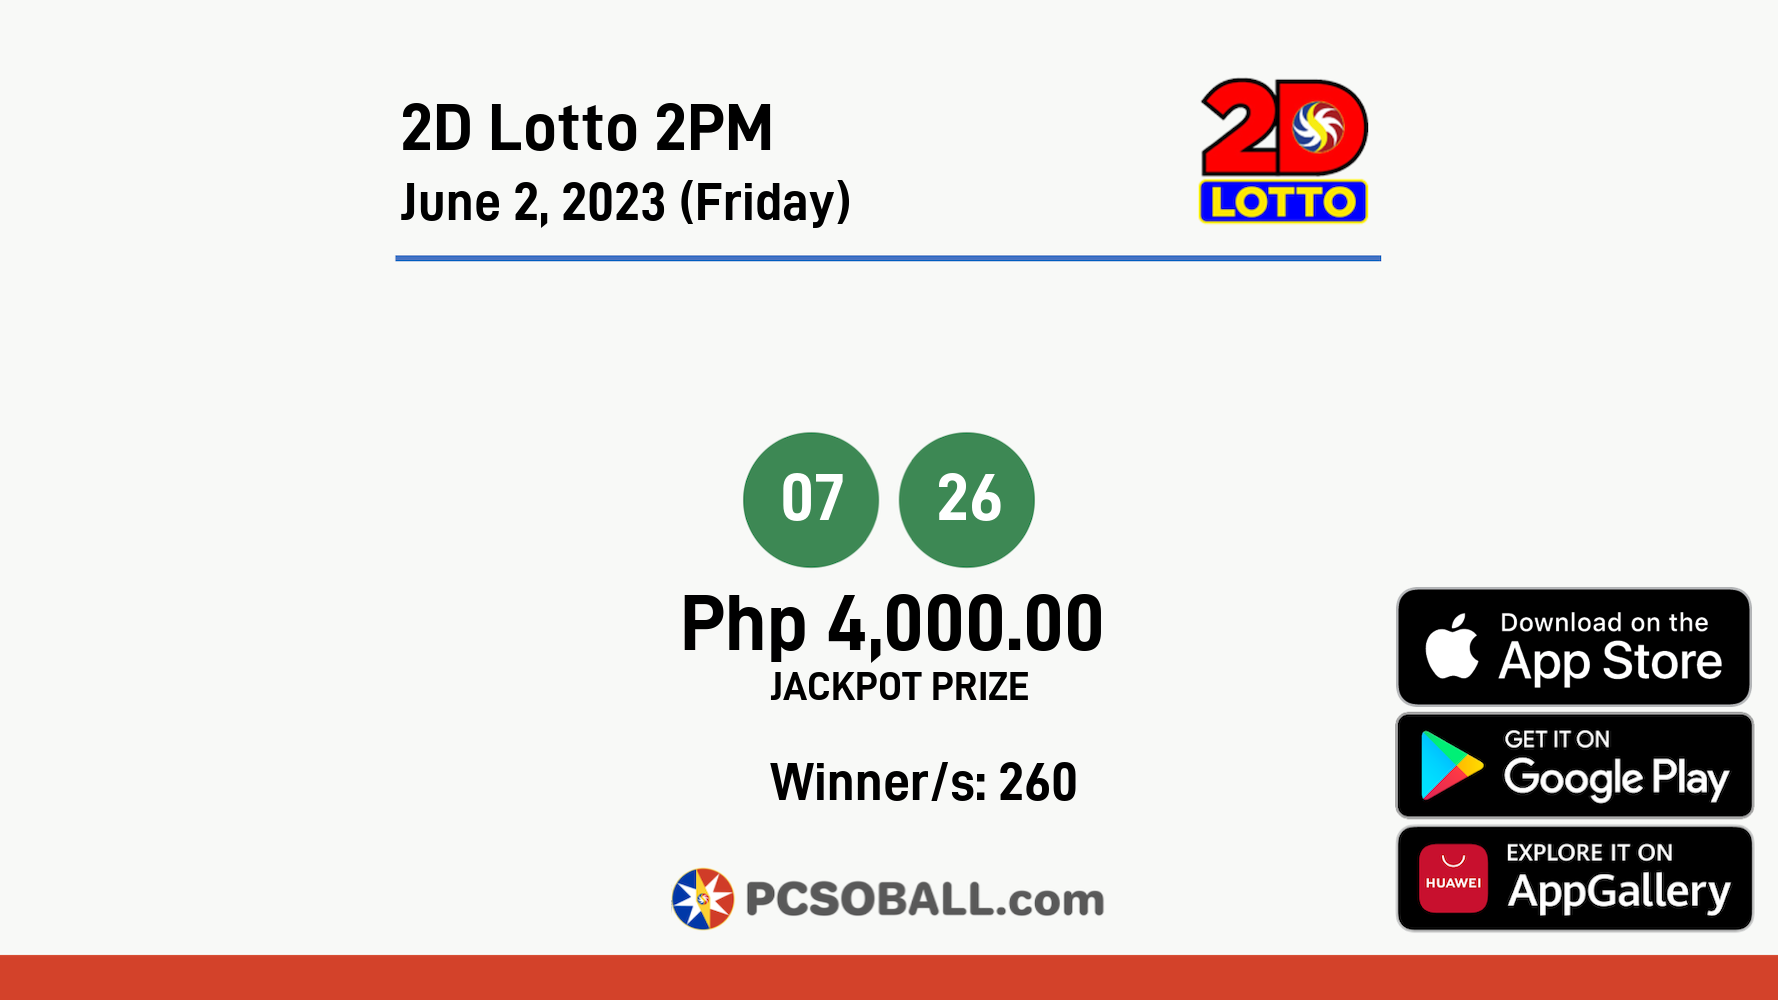 2D Lotto 2PM June 2, 2023 (Friday) Result